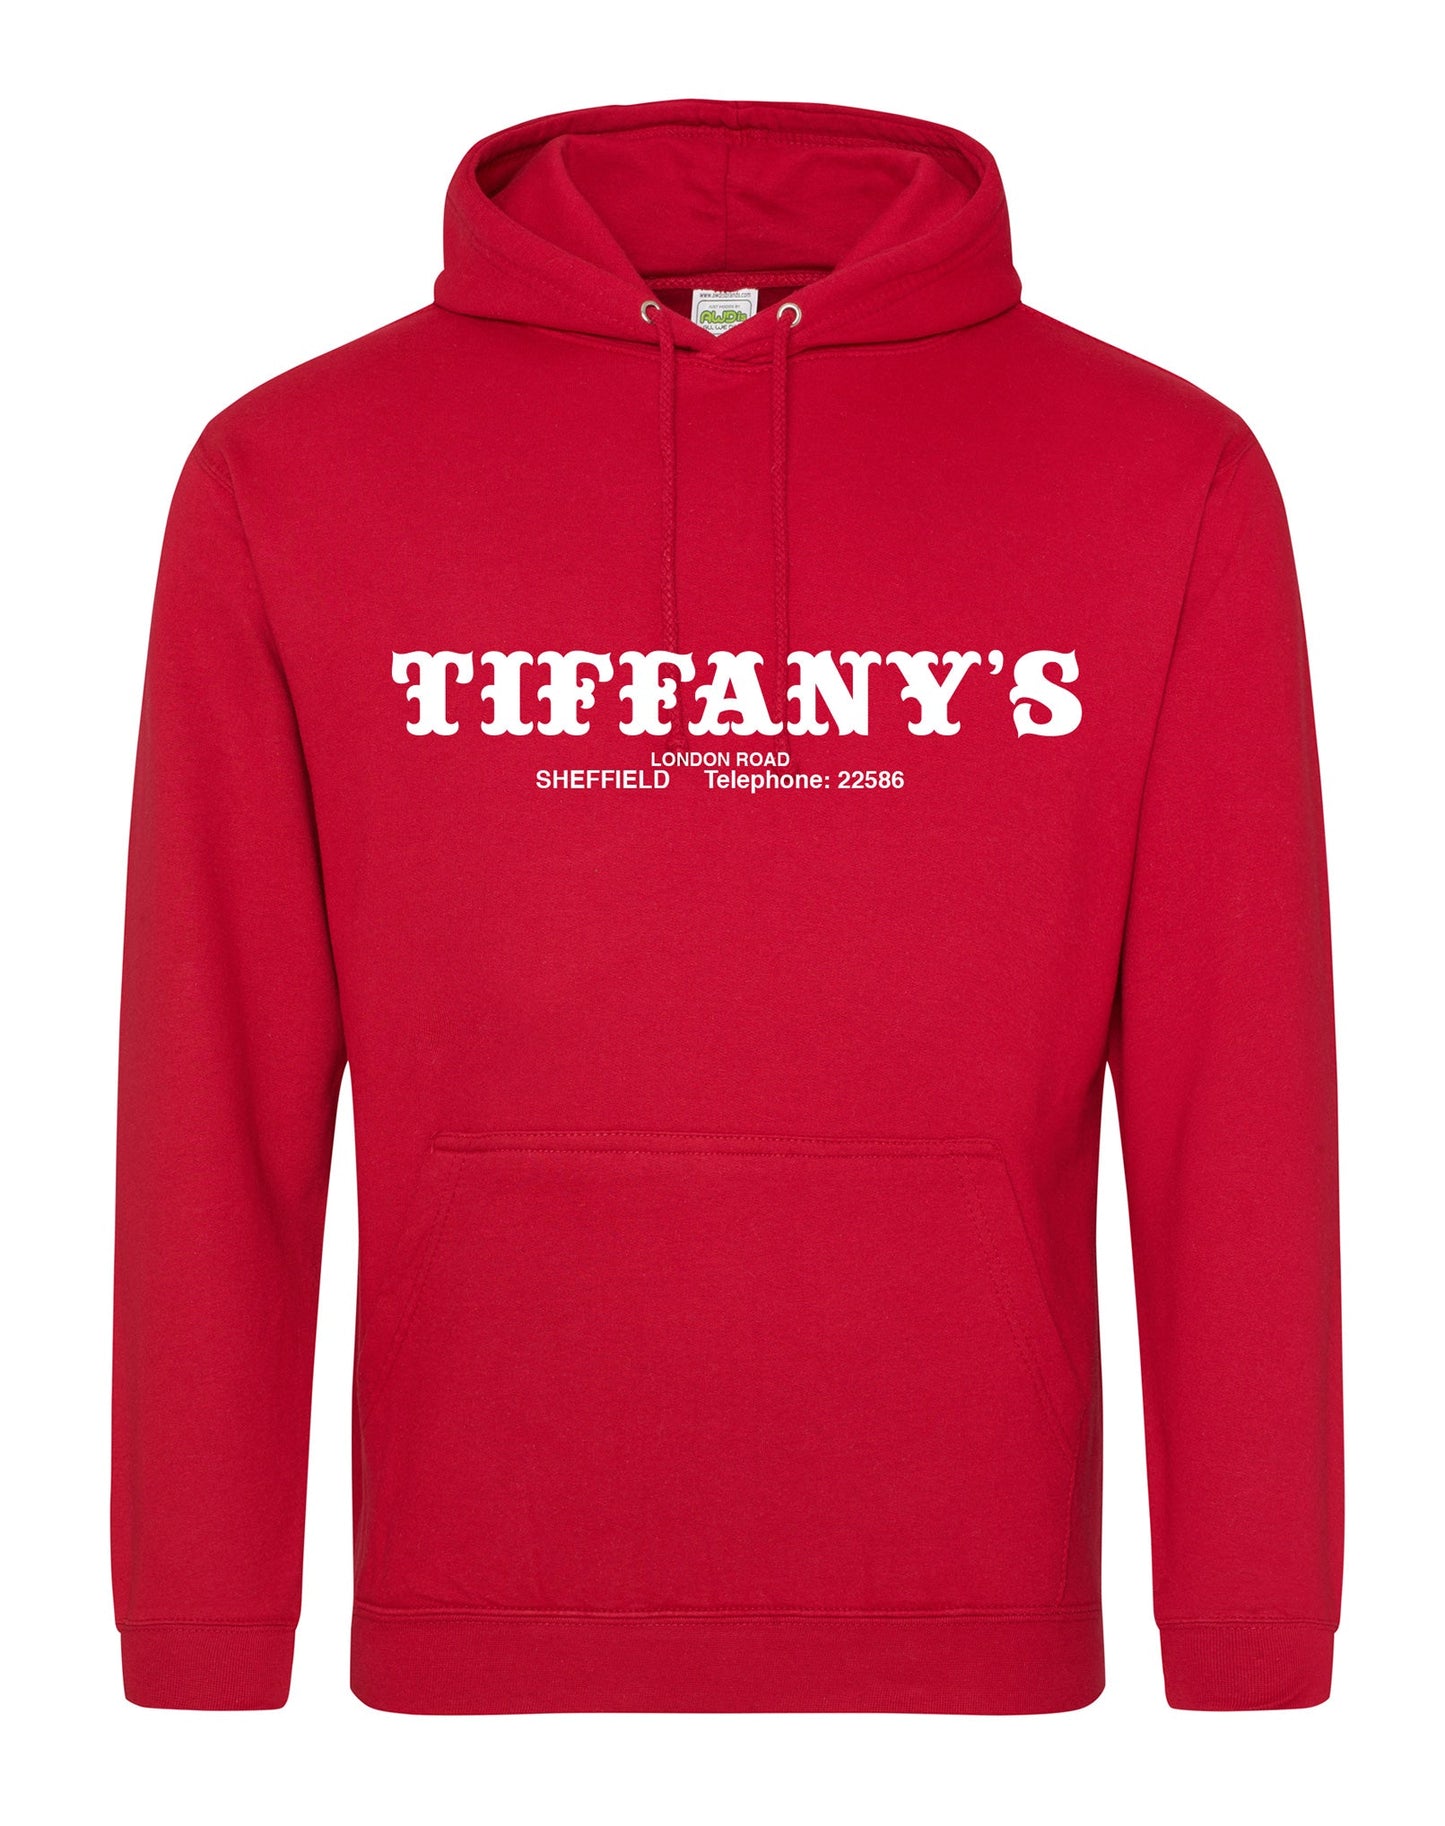 Tiffany's Sheffield unisex fit hoodie - various colours - Dirty Stop Outs